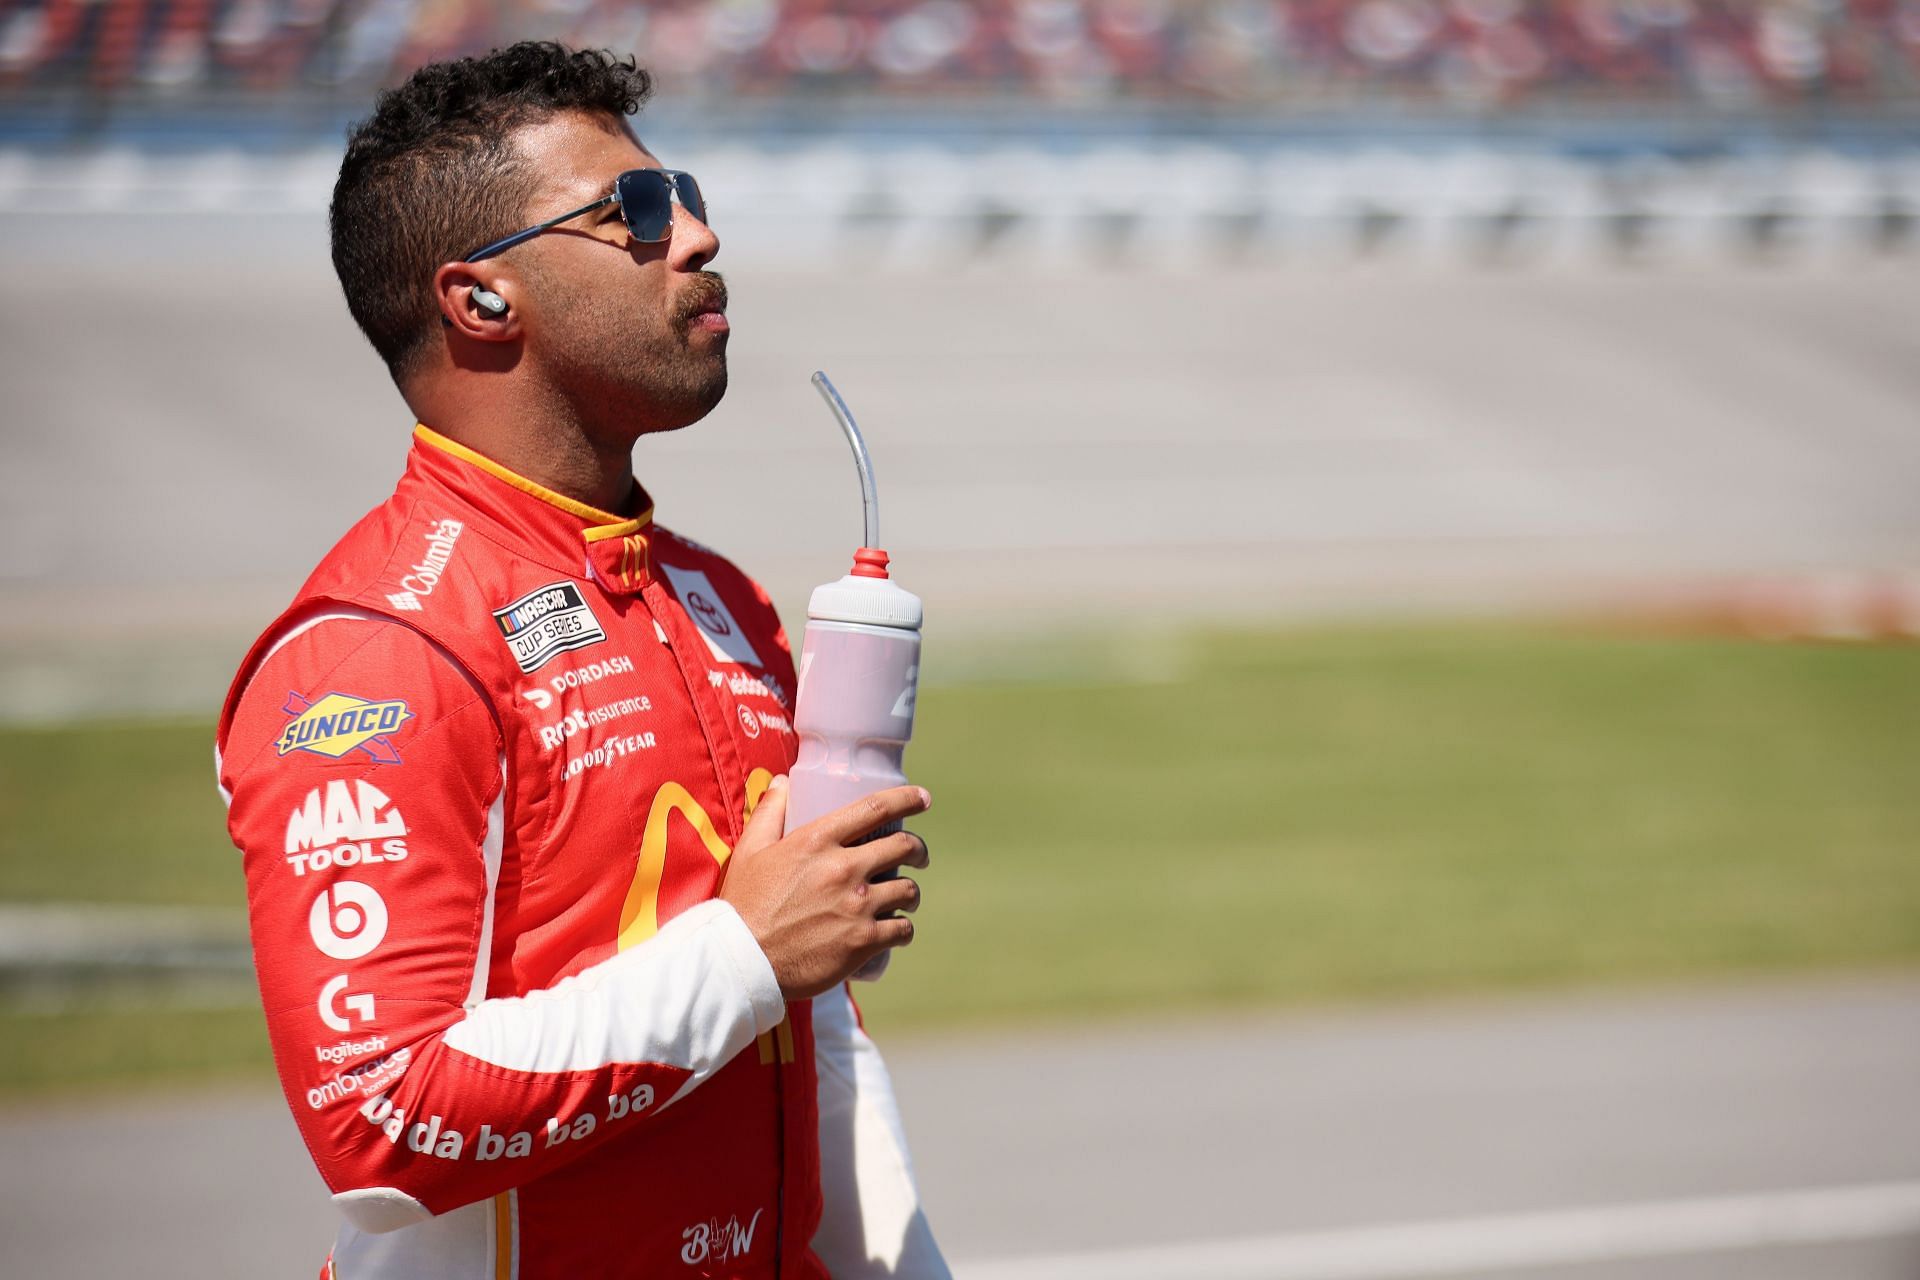 Bubba Wallace waits on the grid during qualifying for the NASCAR Cup Series GEICO 500 at Talladega Superspeedway.